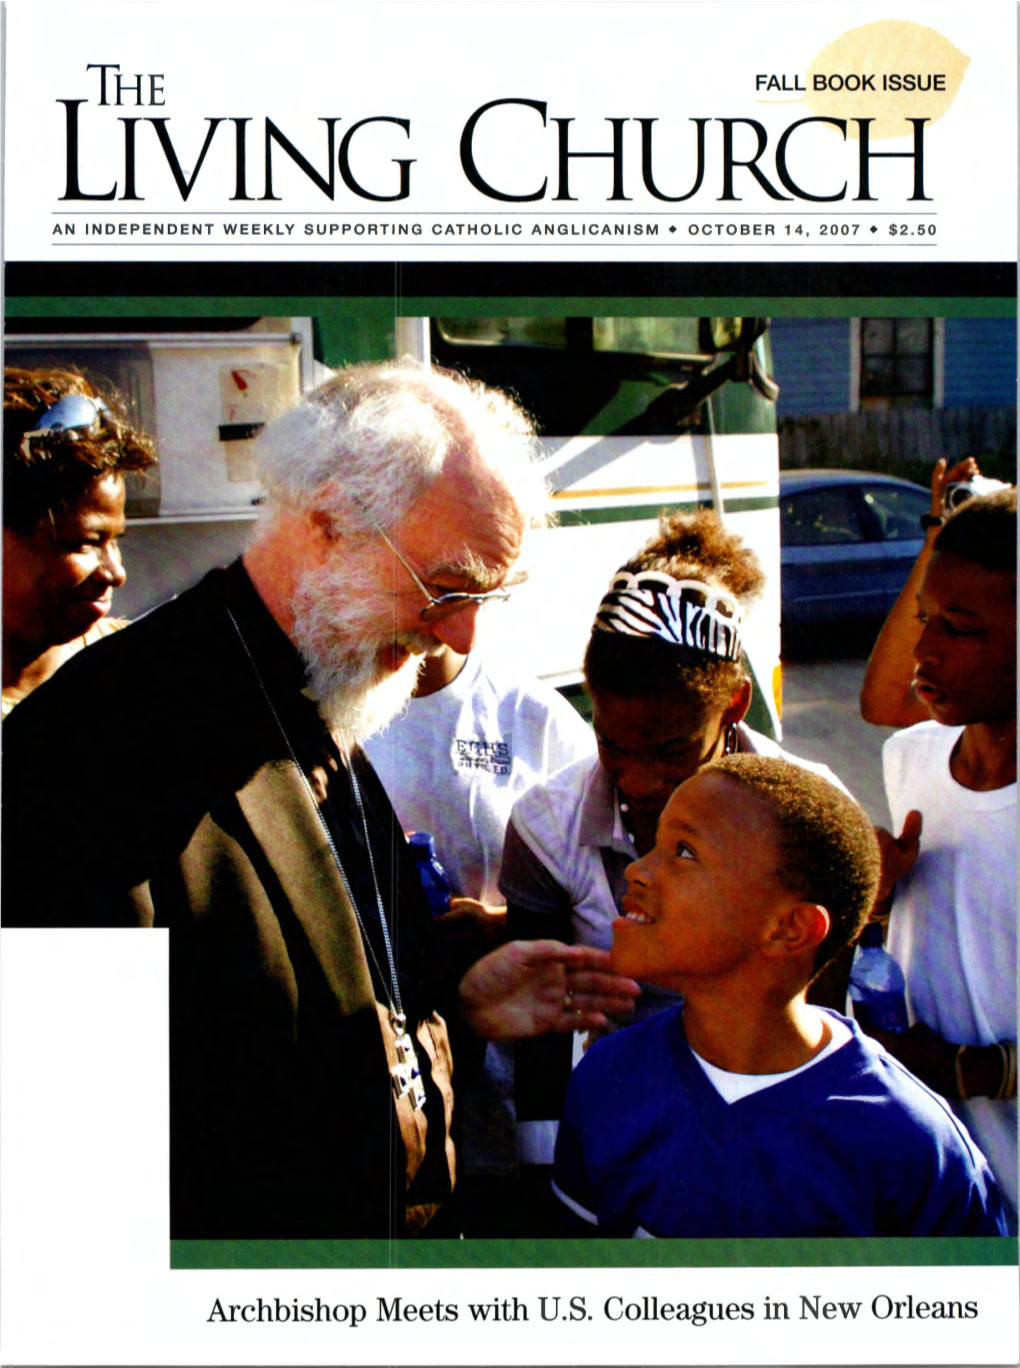 THE LIVING CHURCH Maga Z Ine Is Published by the Living Church Foundation, Inc